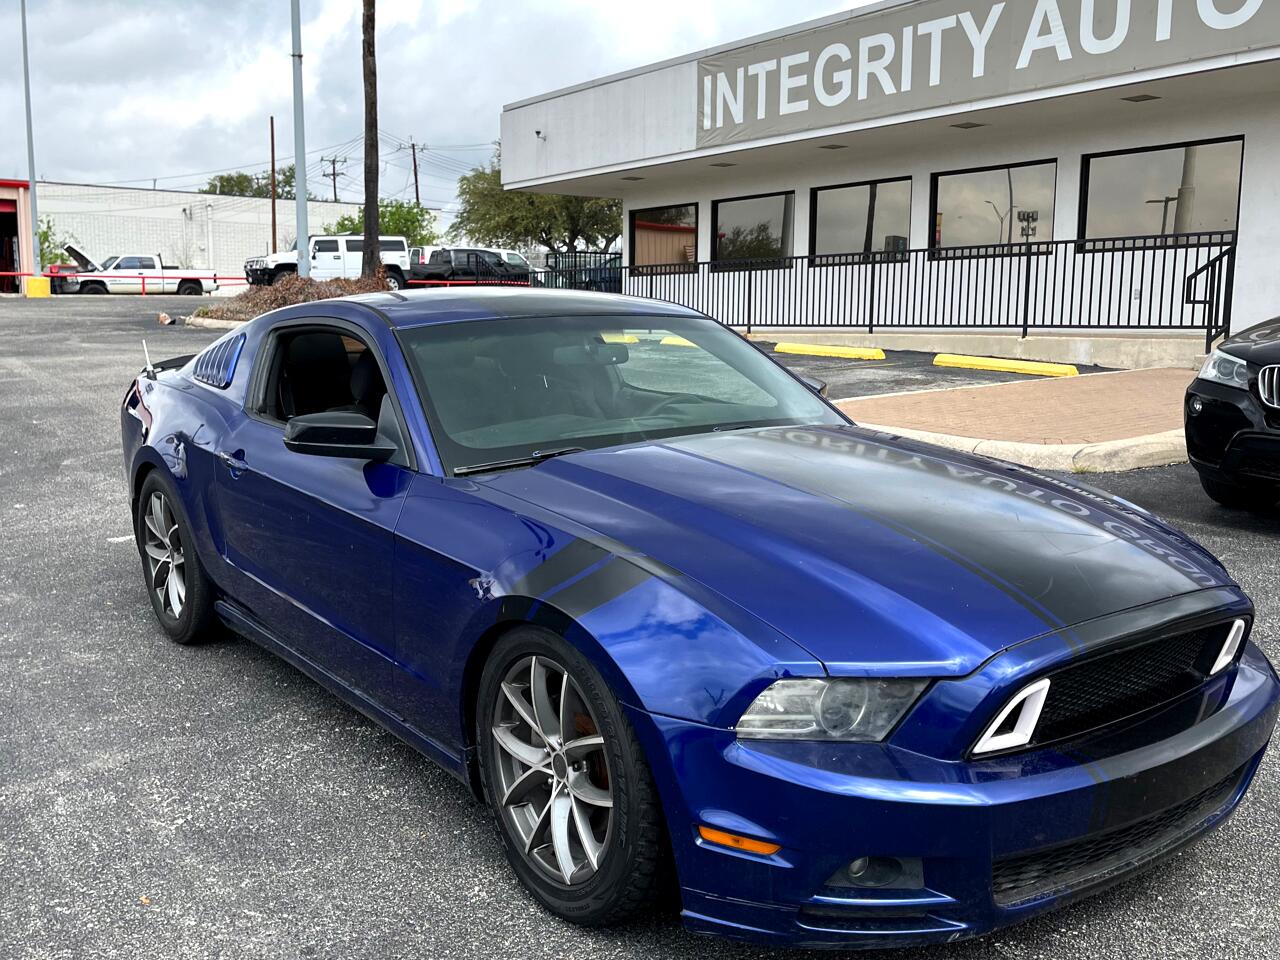 2014 Ford Mustang 2dr Cpe V6